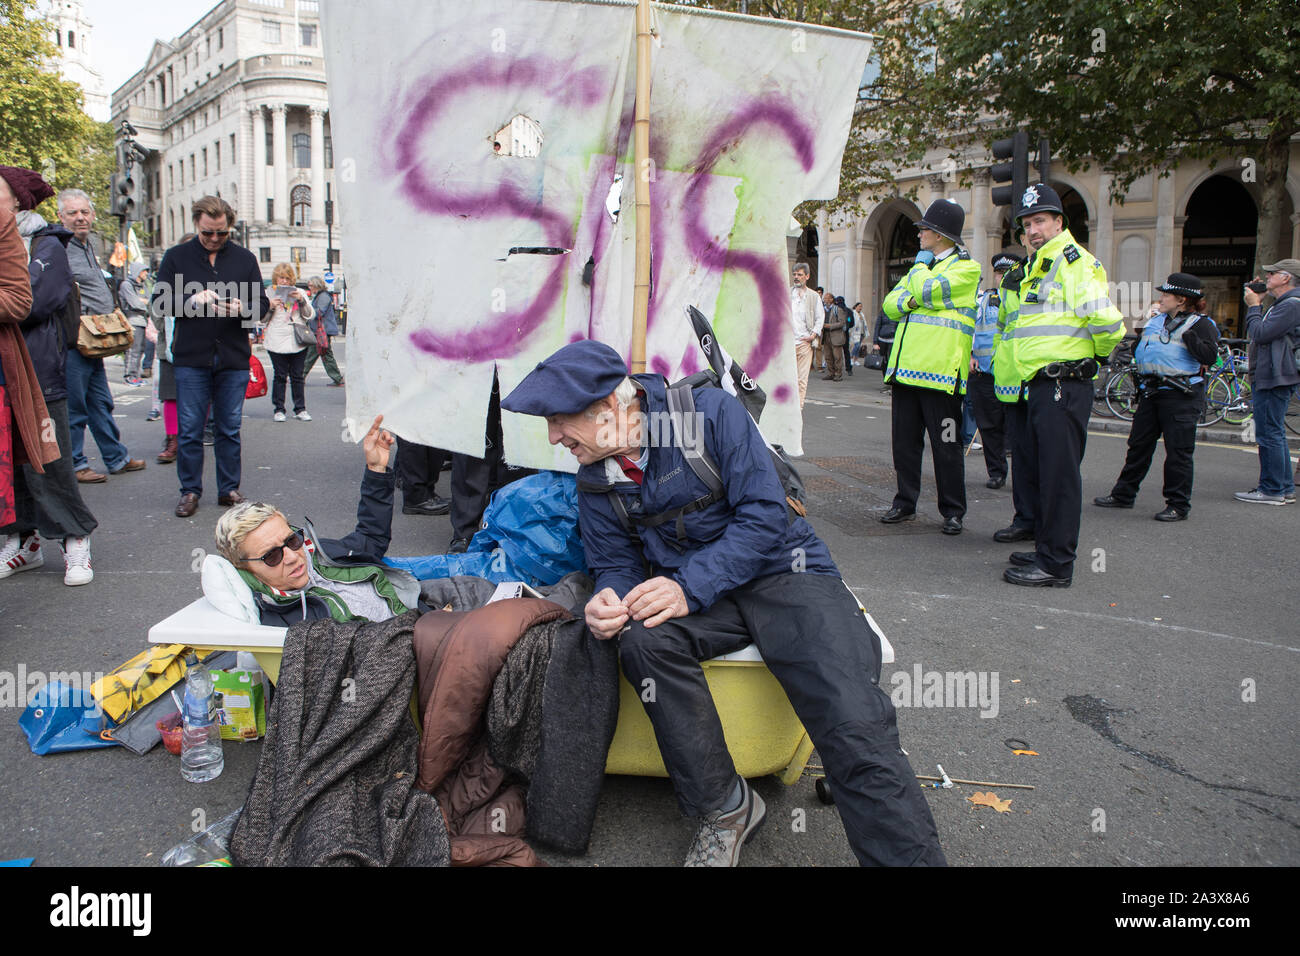 Westminster, London, UK. 10 October 2019. Environmental campaigners Extinction Rebellion have started two weeks protests from 7th to 20th October in and around London to demonstrate against climate change. A protester is glued on to a bath tub. The protesters in Trafalgar Square demand decisive action from the UK Government on the global environmental crisis. Stock Photo